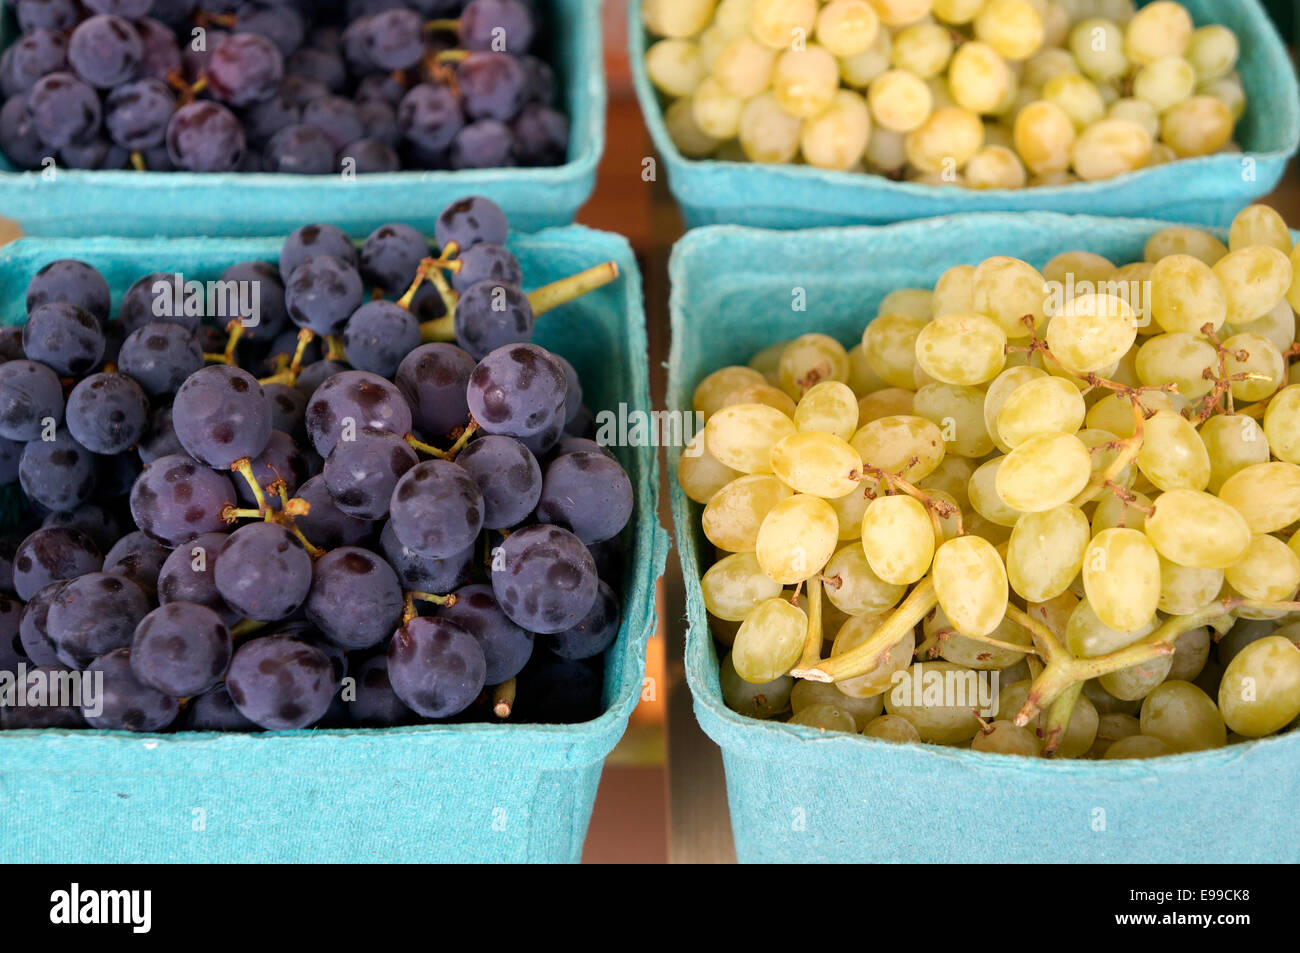 Boxes of purple coronation grapes and green champagne grapes from the Okanagan Valley in British Columbia, Canada Stock Photo